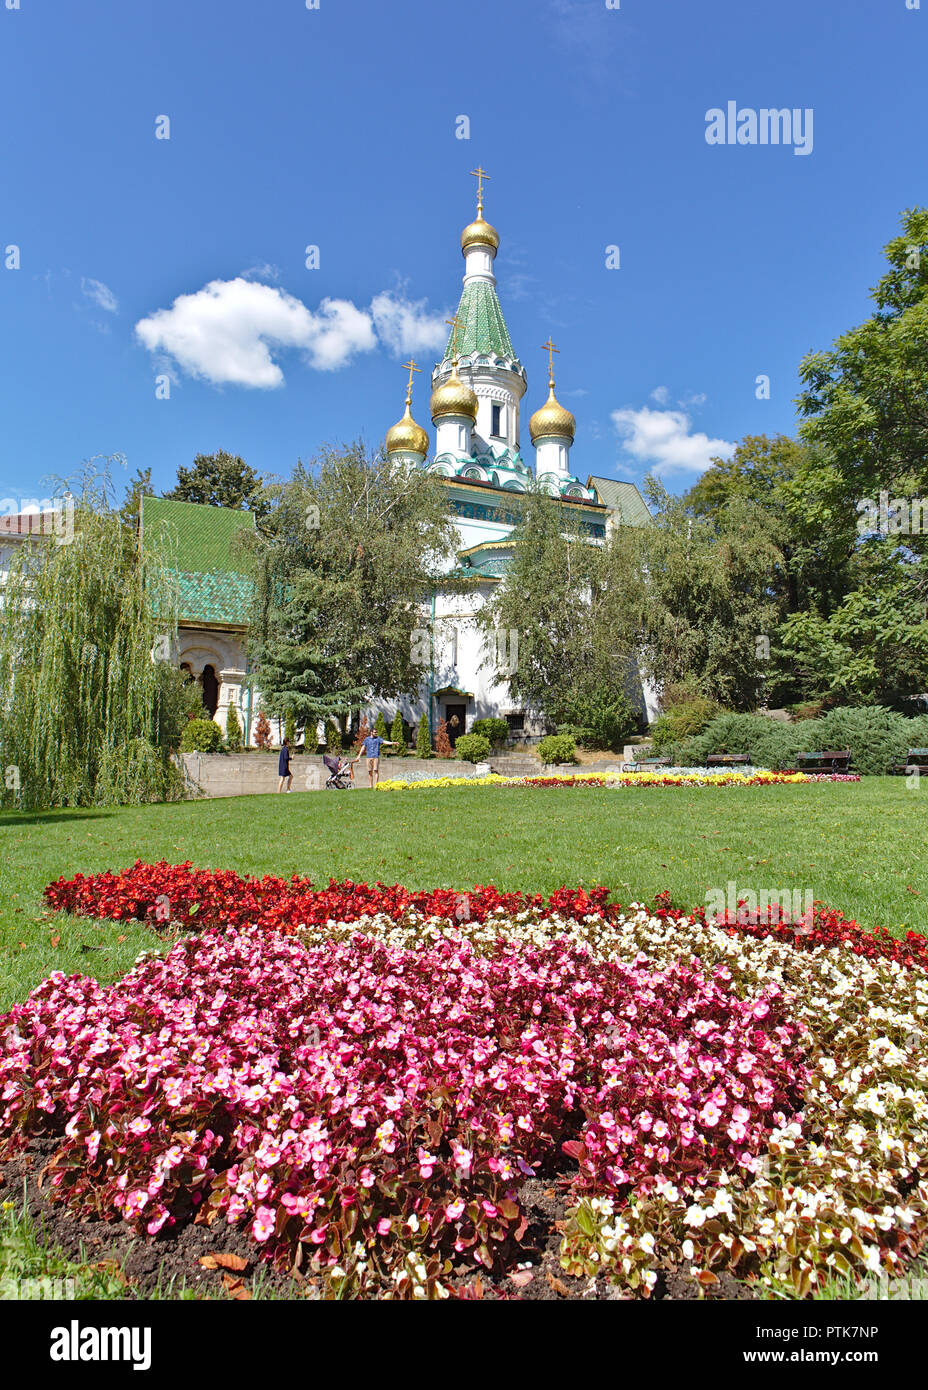 view of Russian Church with pink flower garden in the foreground Stock Photo